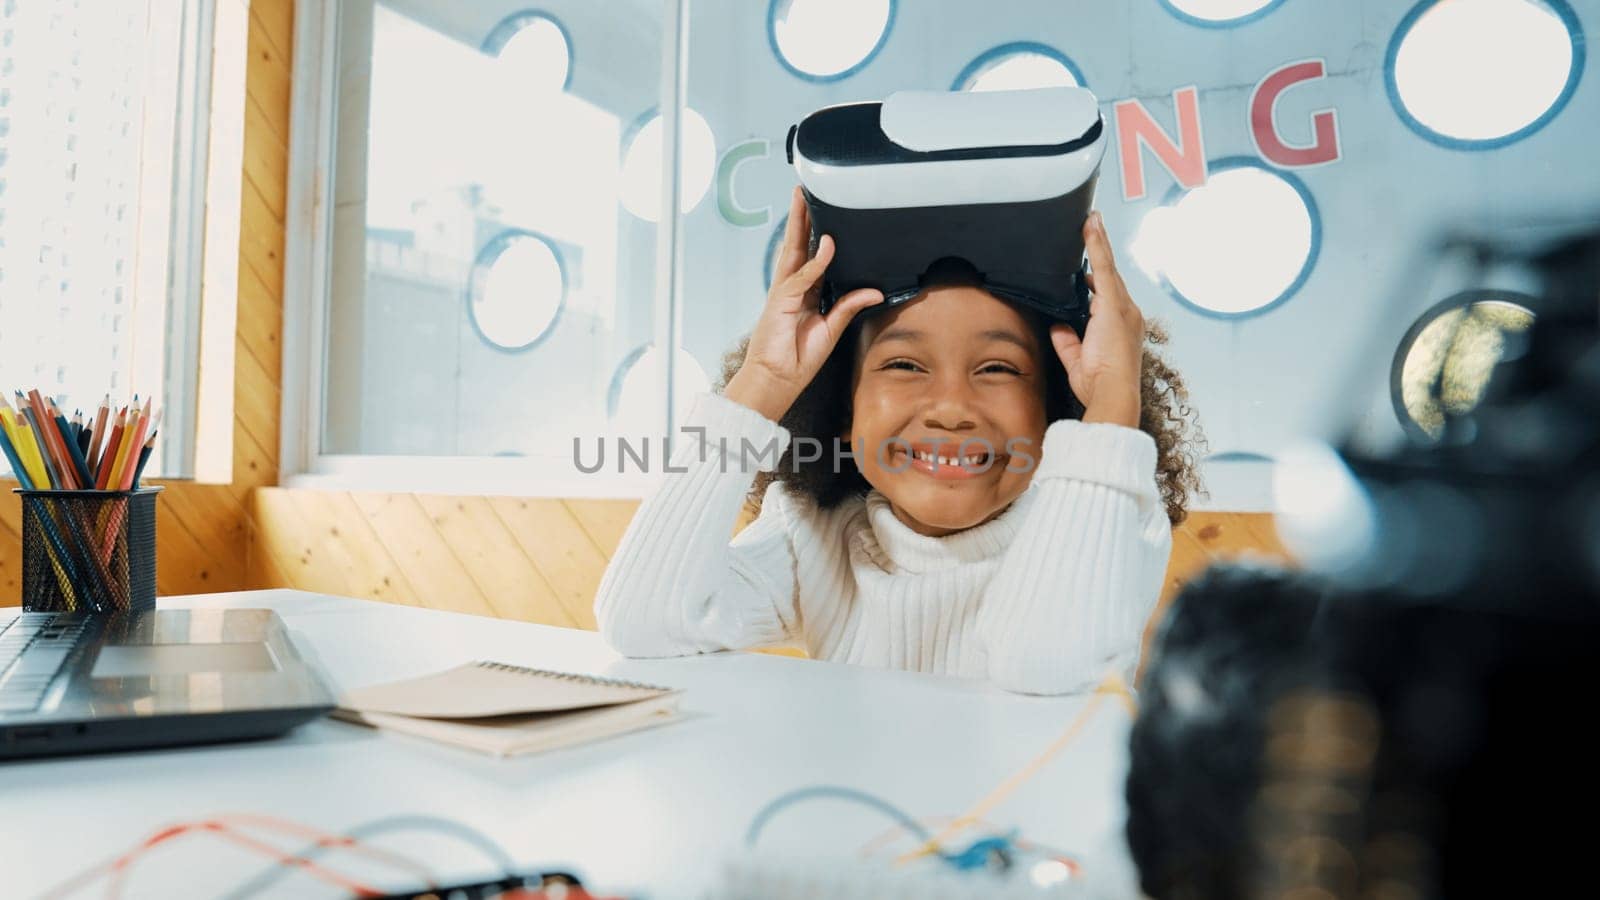 African girl taking off VR glass or head set while looking at camera. Student smiling at camera with colored pencil and laptop placed on table in STEM technology class. Online education. Erudition.